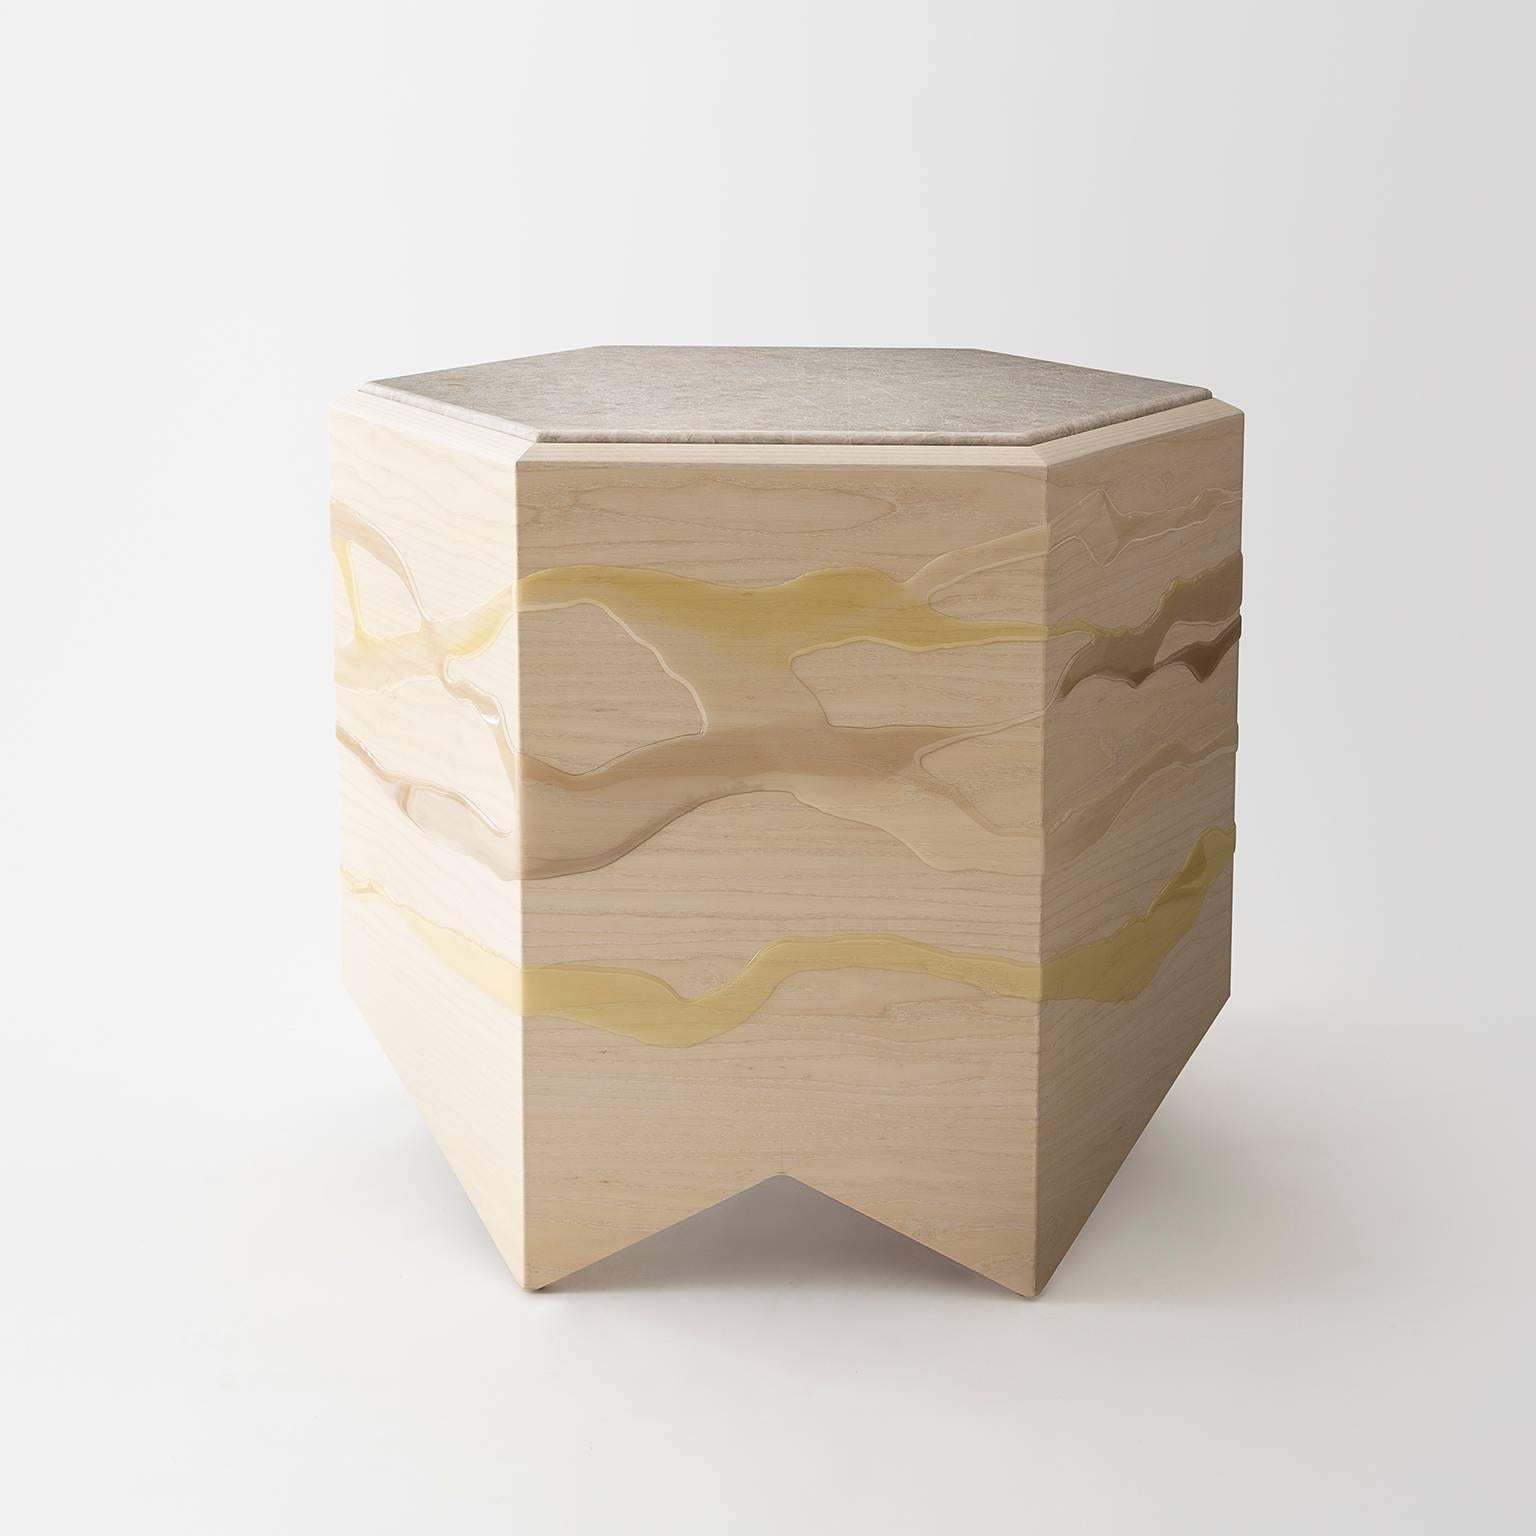 The drip-fold side table by Noble Goods is constructed of a single sheet of ash plywood that has been hand-dripped with liquid resin, then bent into a hexagonal shape. Each table is finished with a custom stone top.

Each drip-fold table is made